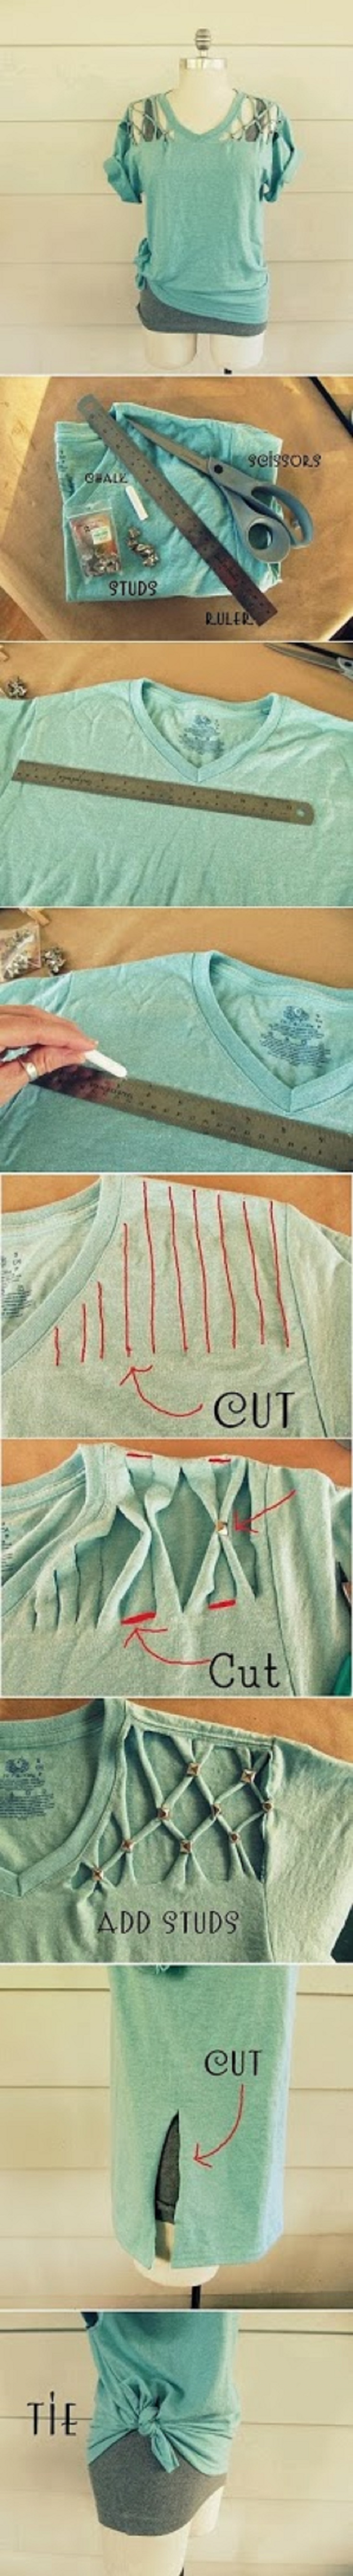 How To Make a Studded T-Shirt For You